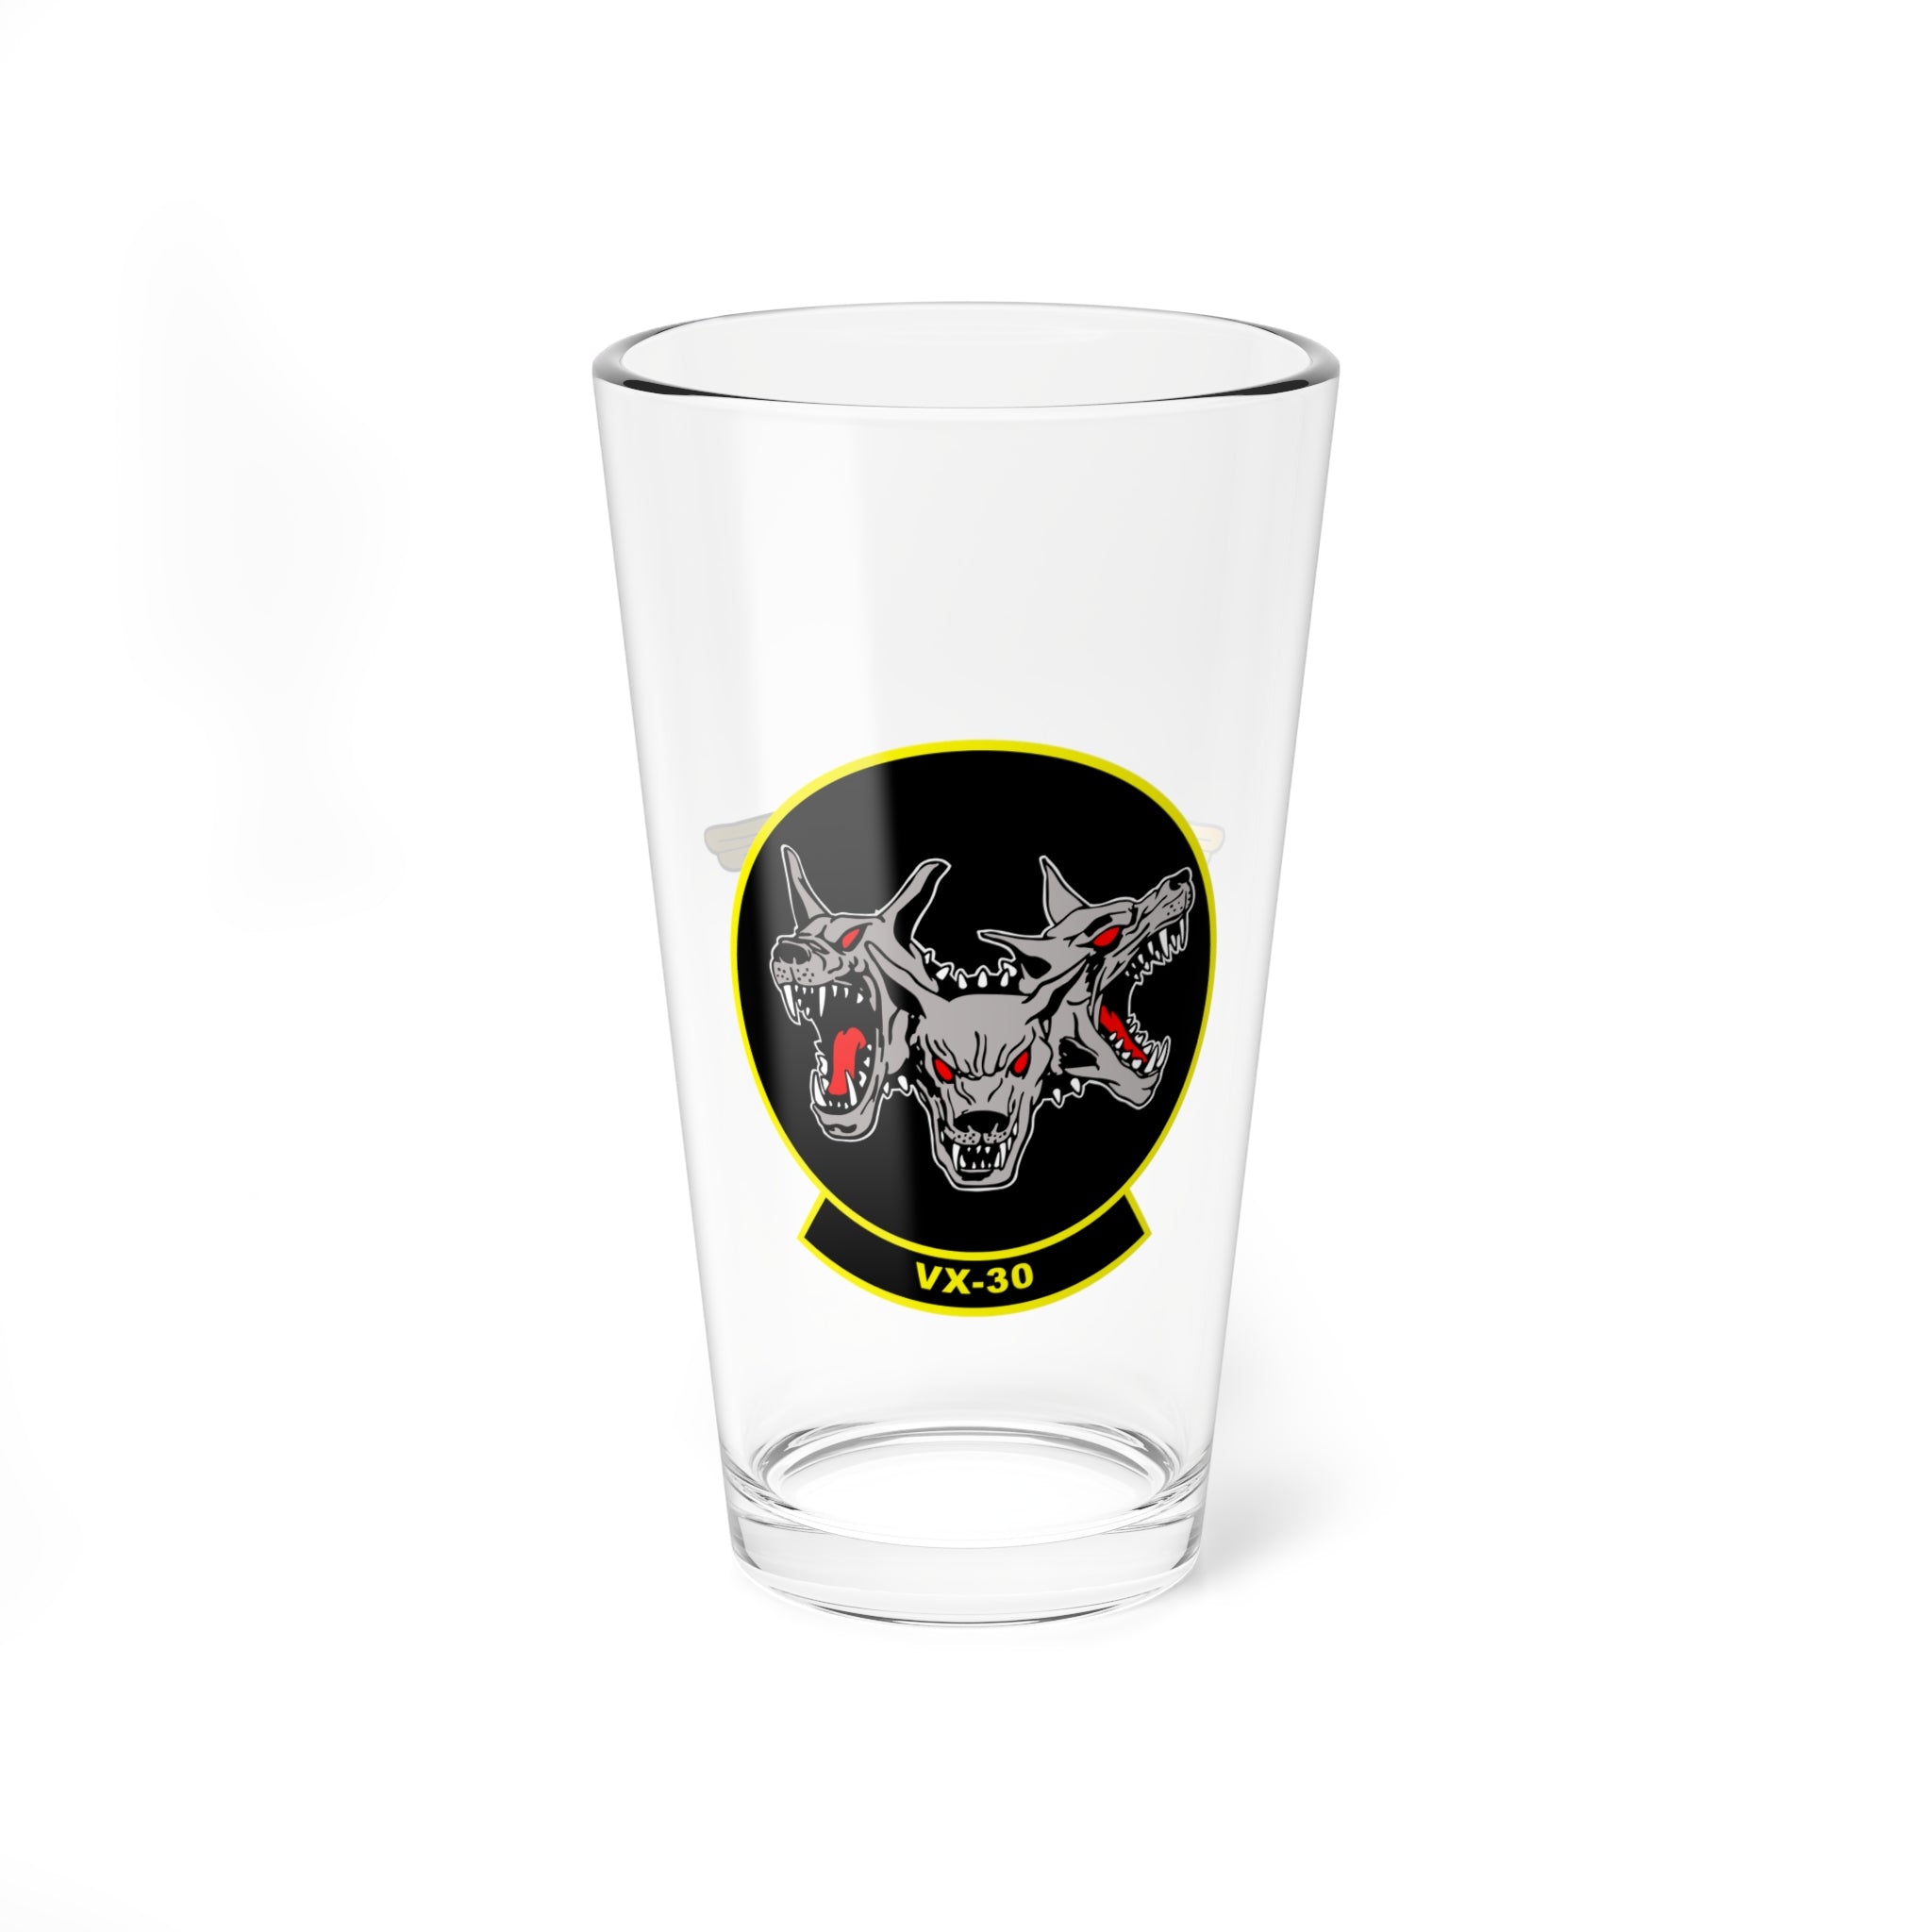 VX-30 "Bloodhounds" Aviator Pint Glass, 16oz, Navy Test and Evaluation Squadron flying Multiple Aircraft